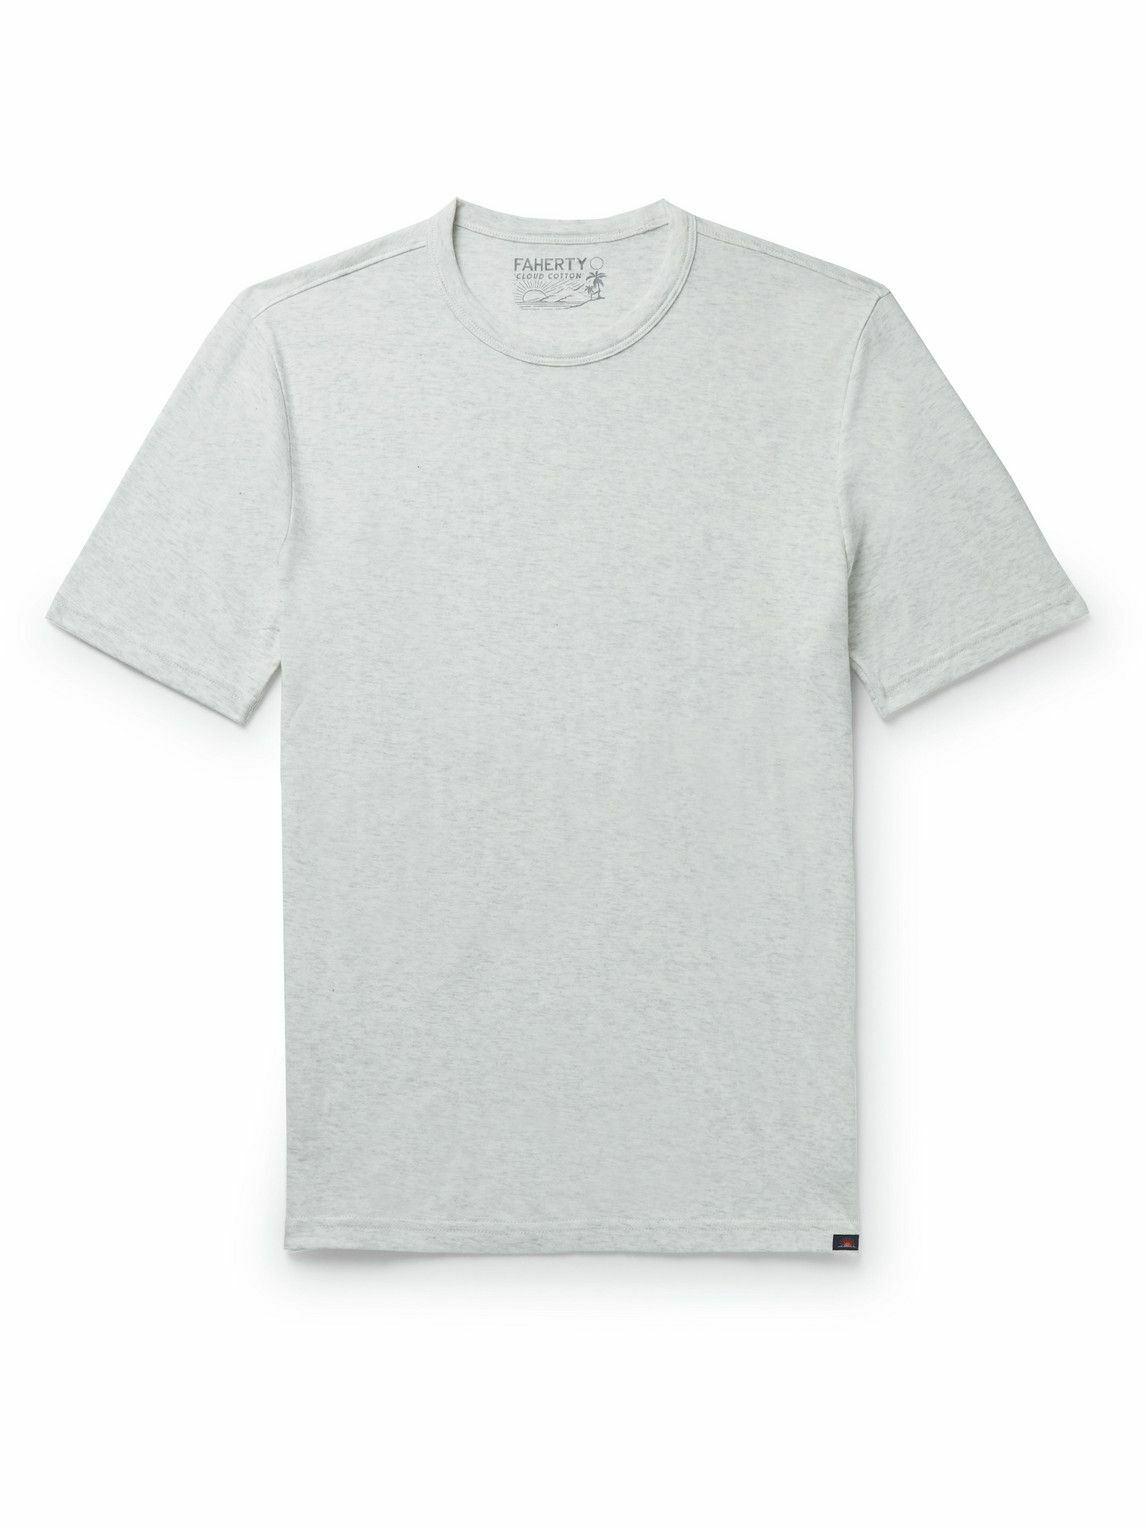 Faherty - Cloud Pima Cotton and Modal-Blend Jersey T-Shirt - Gray Faherty